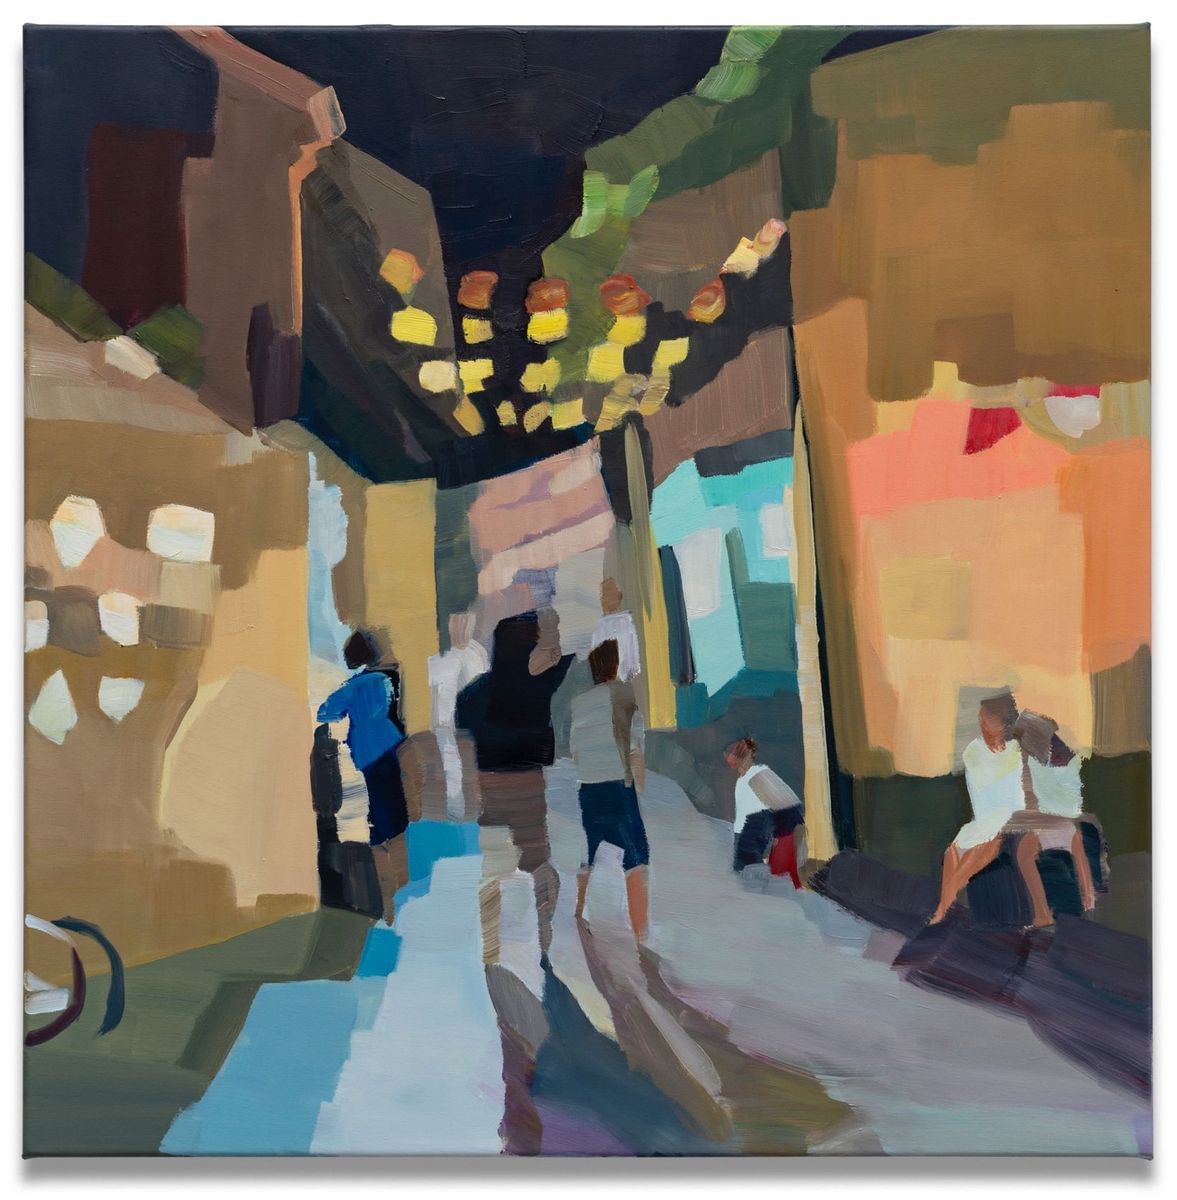 Lyndal Hargrave - At Night, Hoi An